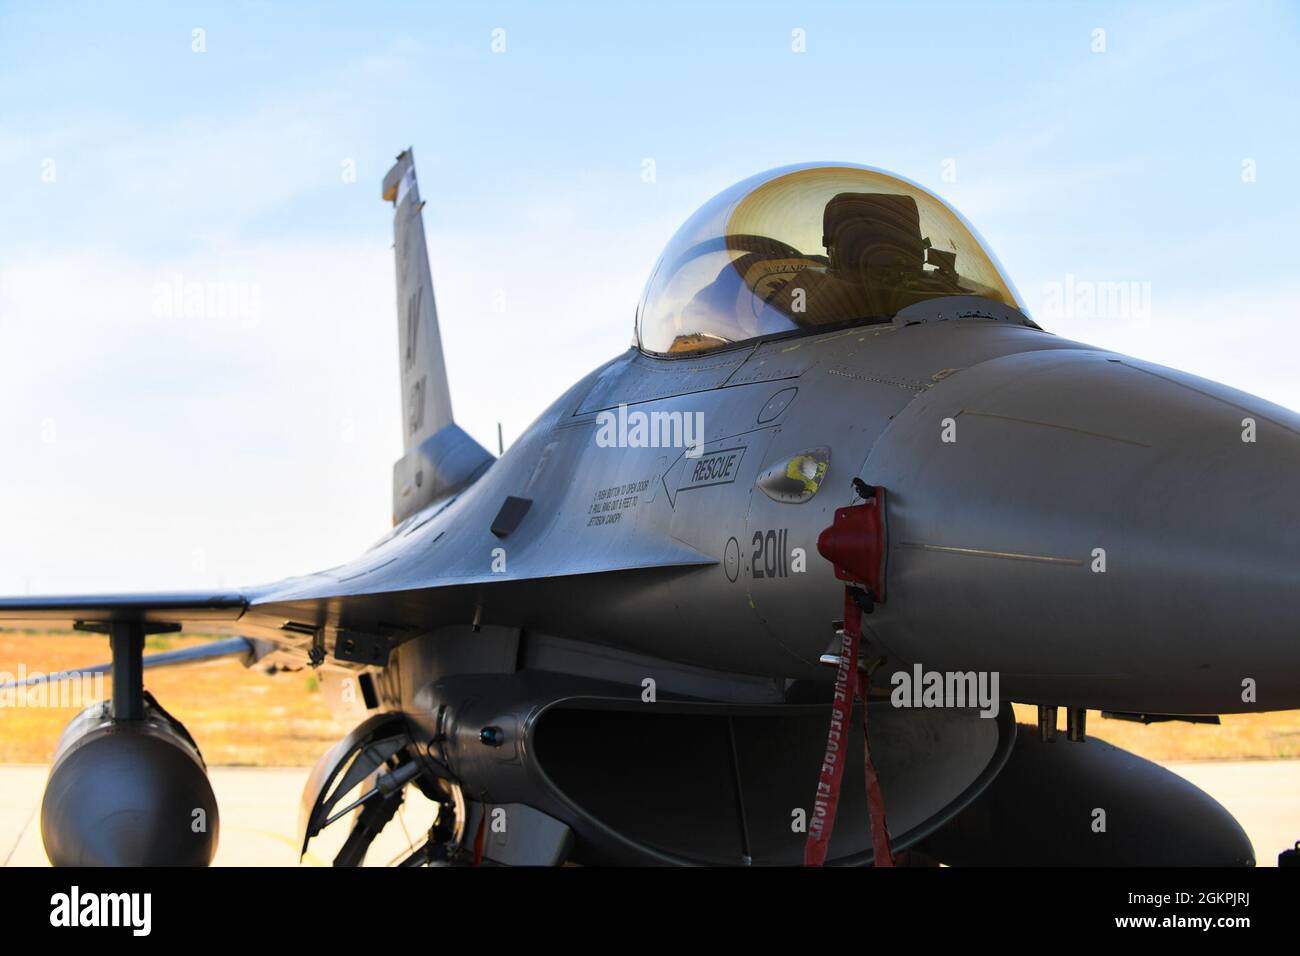 A U.S. Air Force F-16 Fighting Falcon sits at Ben Guerir Air Base, Morocco,  14 June, 2021 after arriving for Exercise African Lion 2021. African Lion  demonstrates our long-term commitment to improve